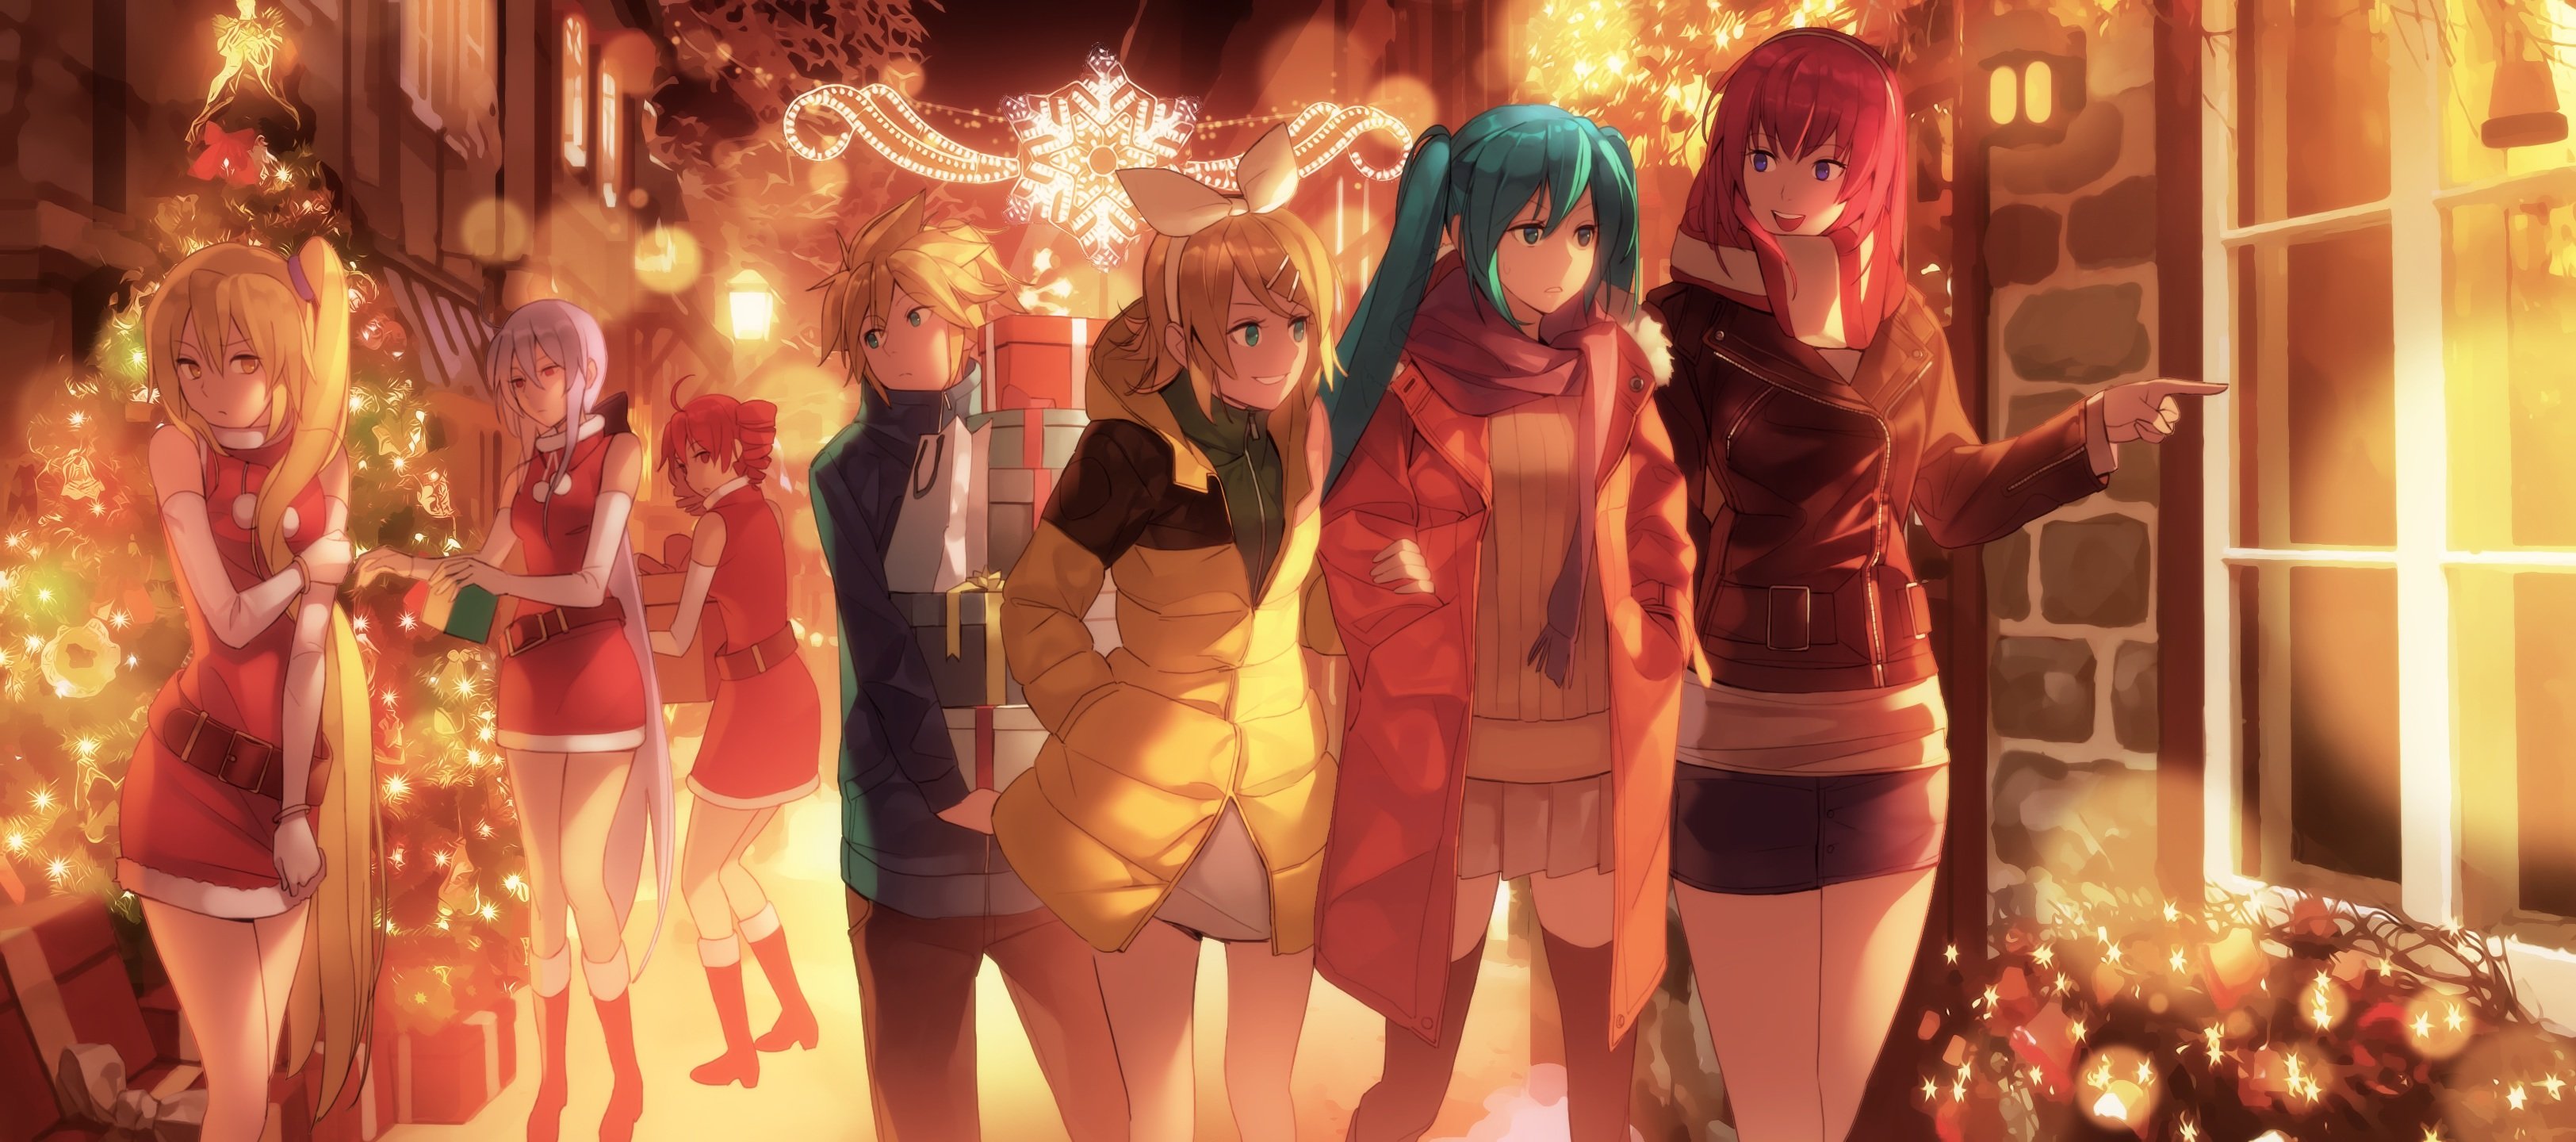 blue, Eyes, Boots, Christmas, Dress, Gloves, Group, Headband, Jandy, Male, Night, Ponytail, Red, Eyes, Red, Hair, Ribbons, Scarf, Skirt, Twintails, Utau, Vocaloid Wallpaper